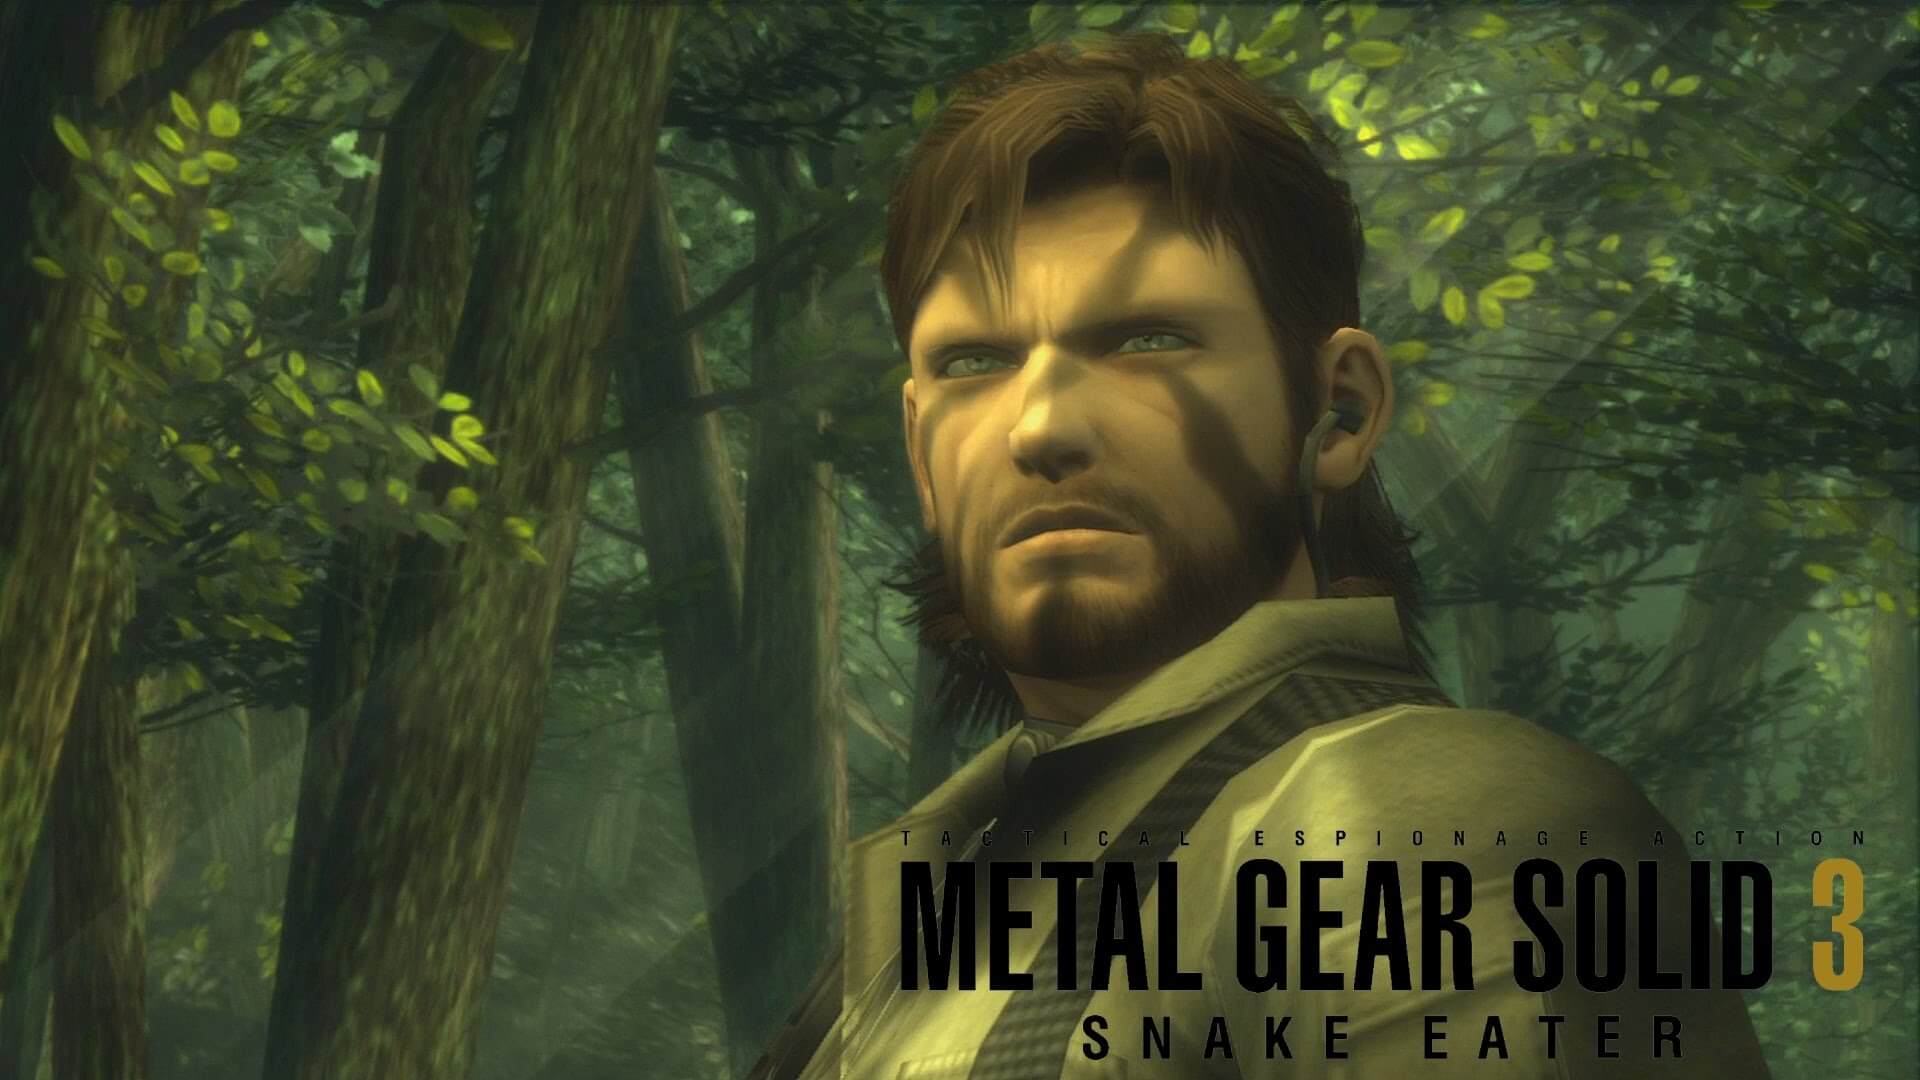 Metal Gear Solid Master Collection Vol. 1 - Launch Trailer